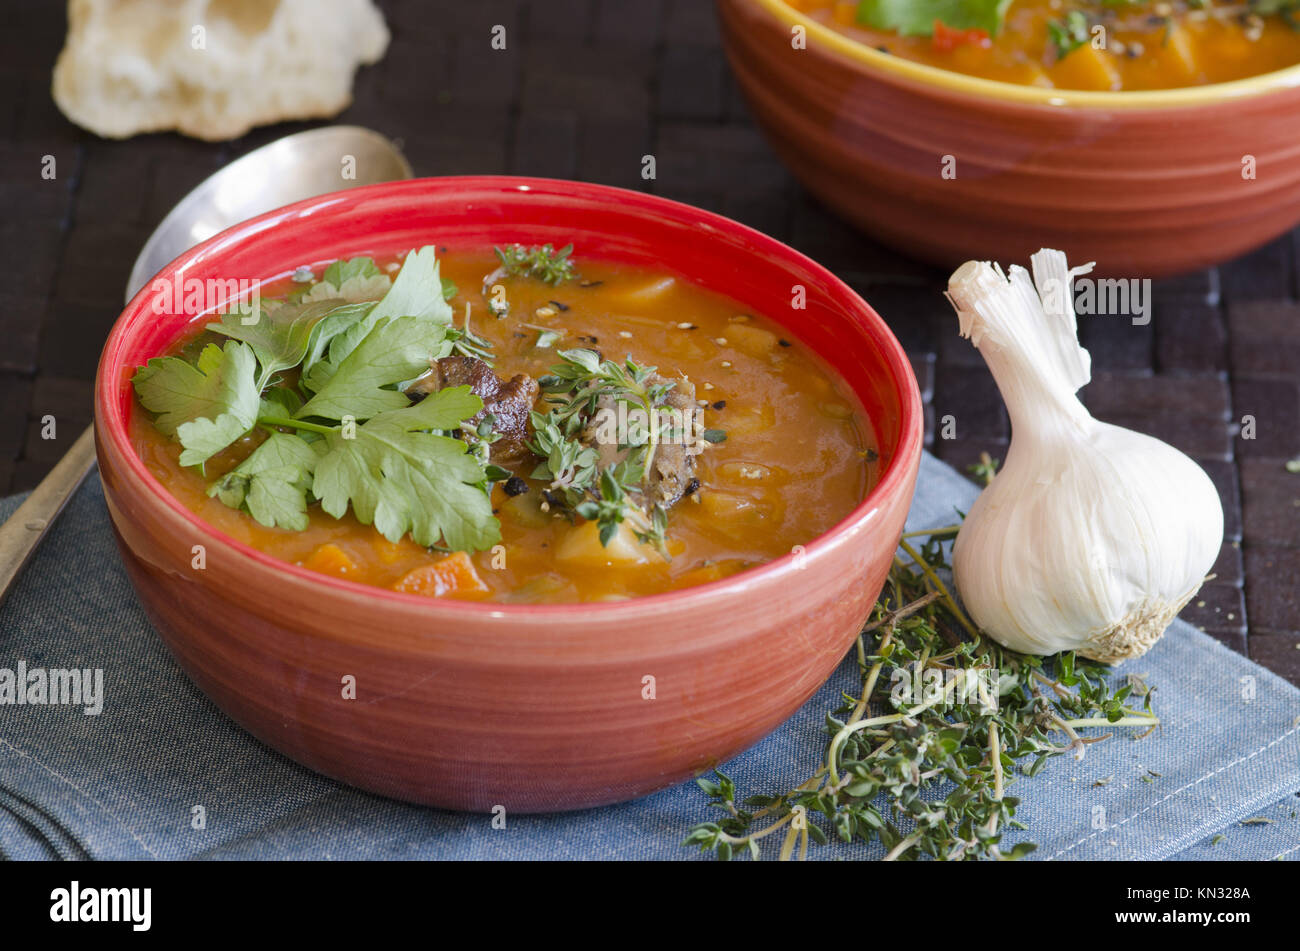 Slow-cooked lamb and root vegetable soup. Stock Photo